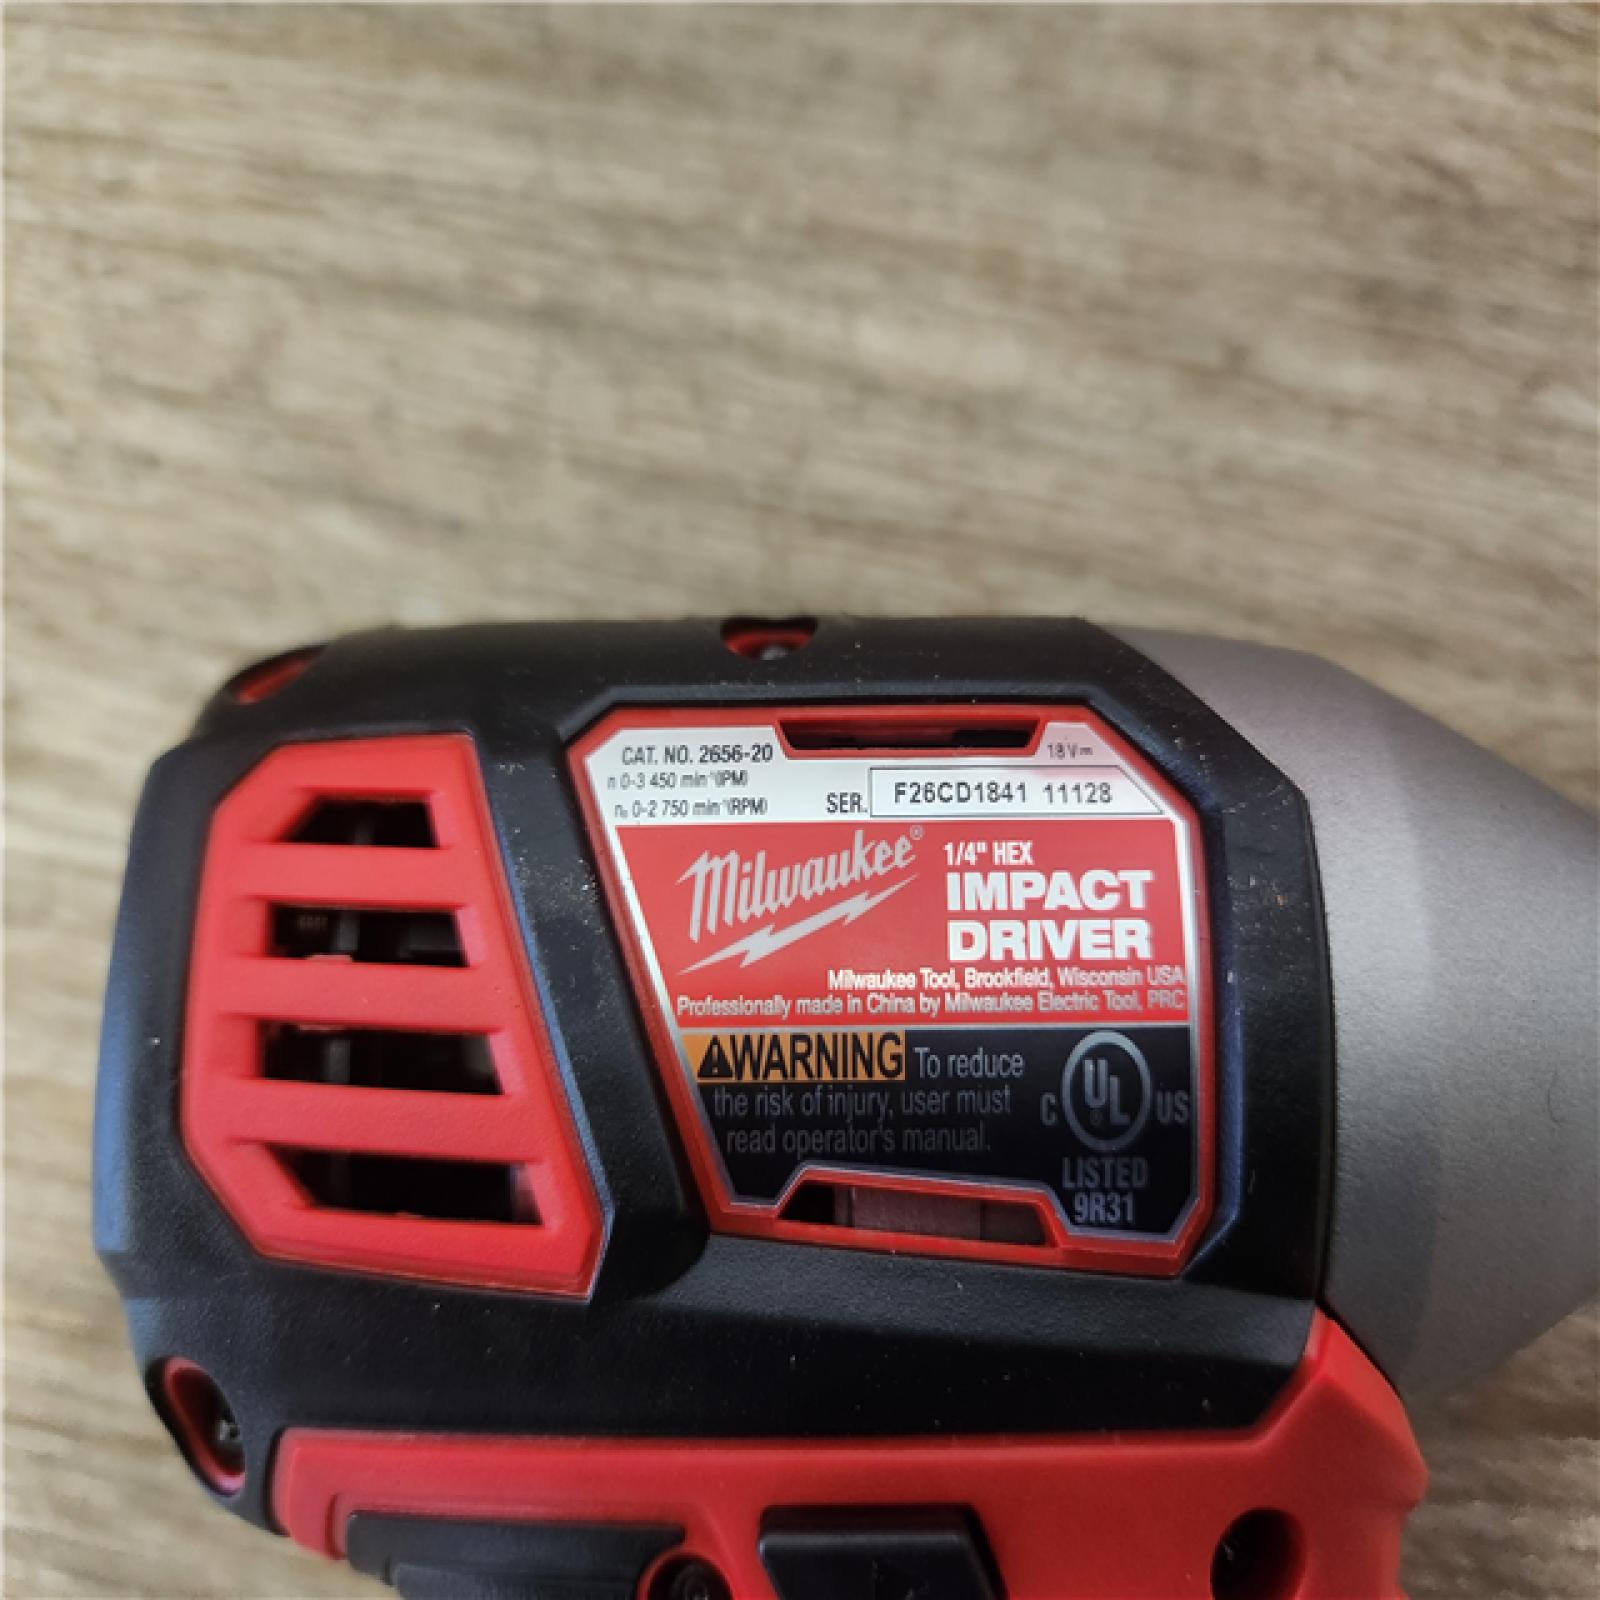 Phoenix Location NEW Milwaukee M18 18V Lithium-Ion Cordless Drill Driver/Impact Driver Combo Kit (2-Tool) W/ Two 1.5Ah Batteries, Charger Tool Bag